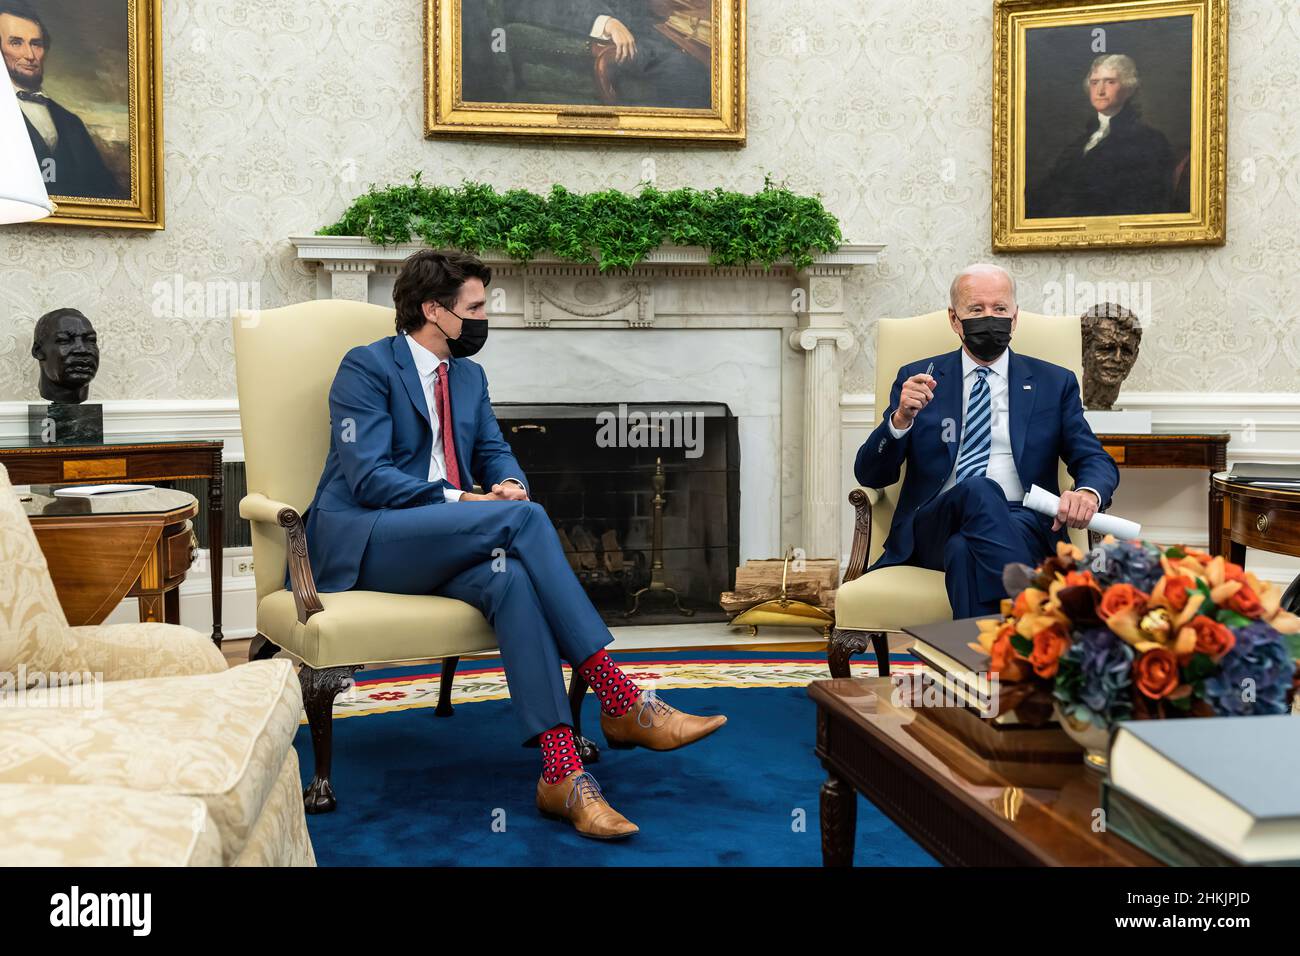 President Joe Biden meets with Canadian Prime Minister Justin Trudeau, Thursday, November 18, 2021, in the Oval Office. (Official White House Photo by Adam Schultz) Stock Photo